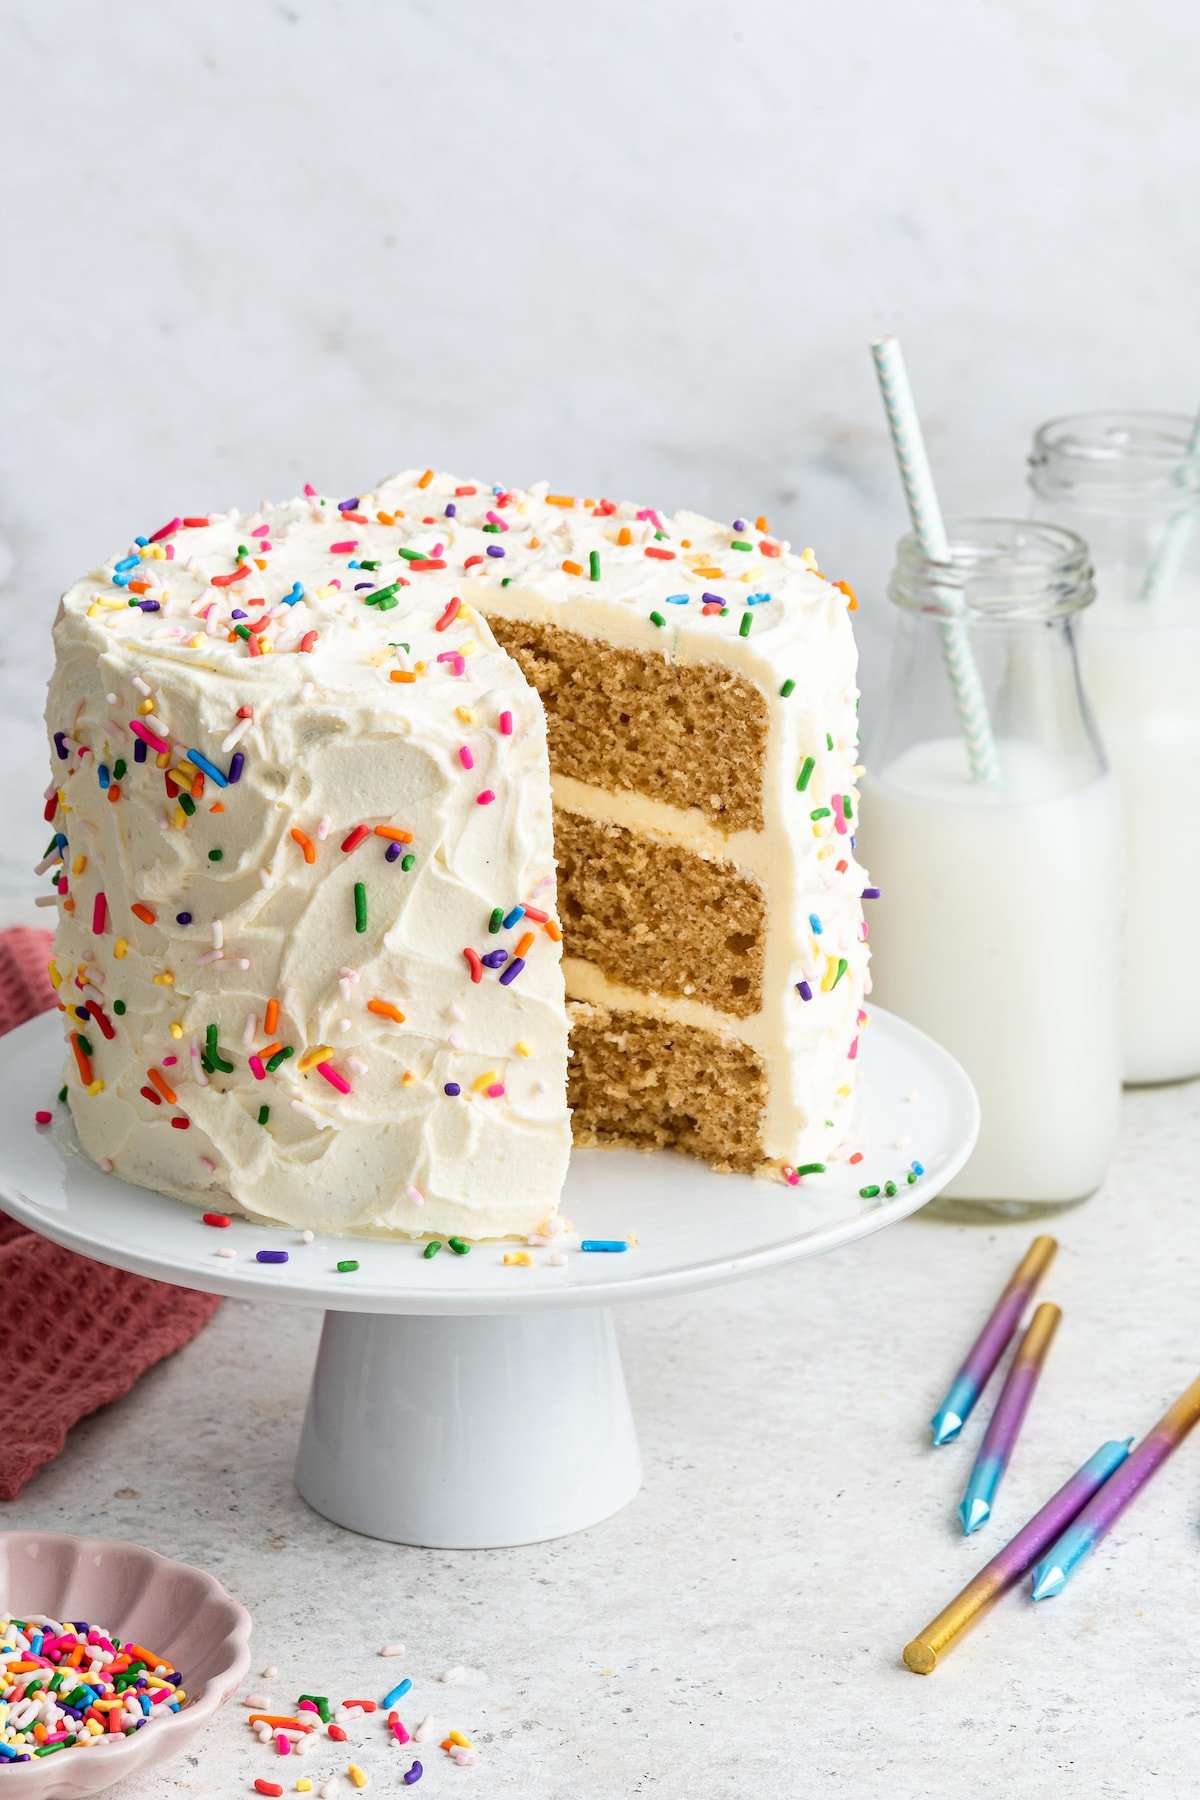 A vanilla cake frosted with rainbow sprinkles sitting on a cake pedestal with one slice of cake removed.